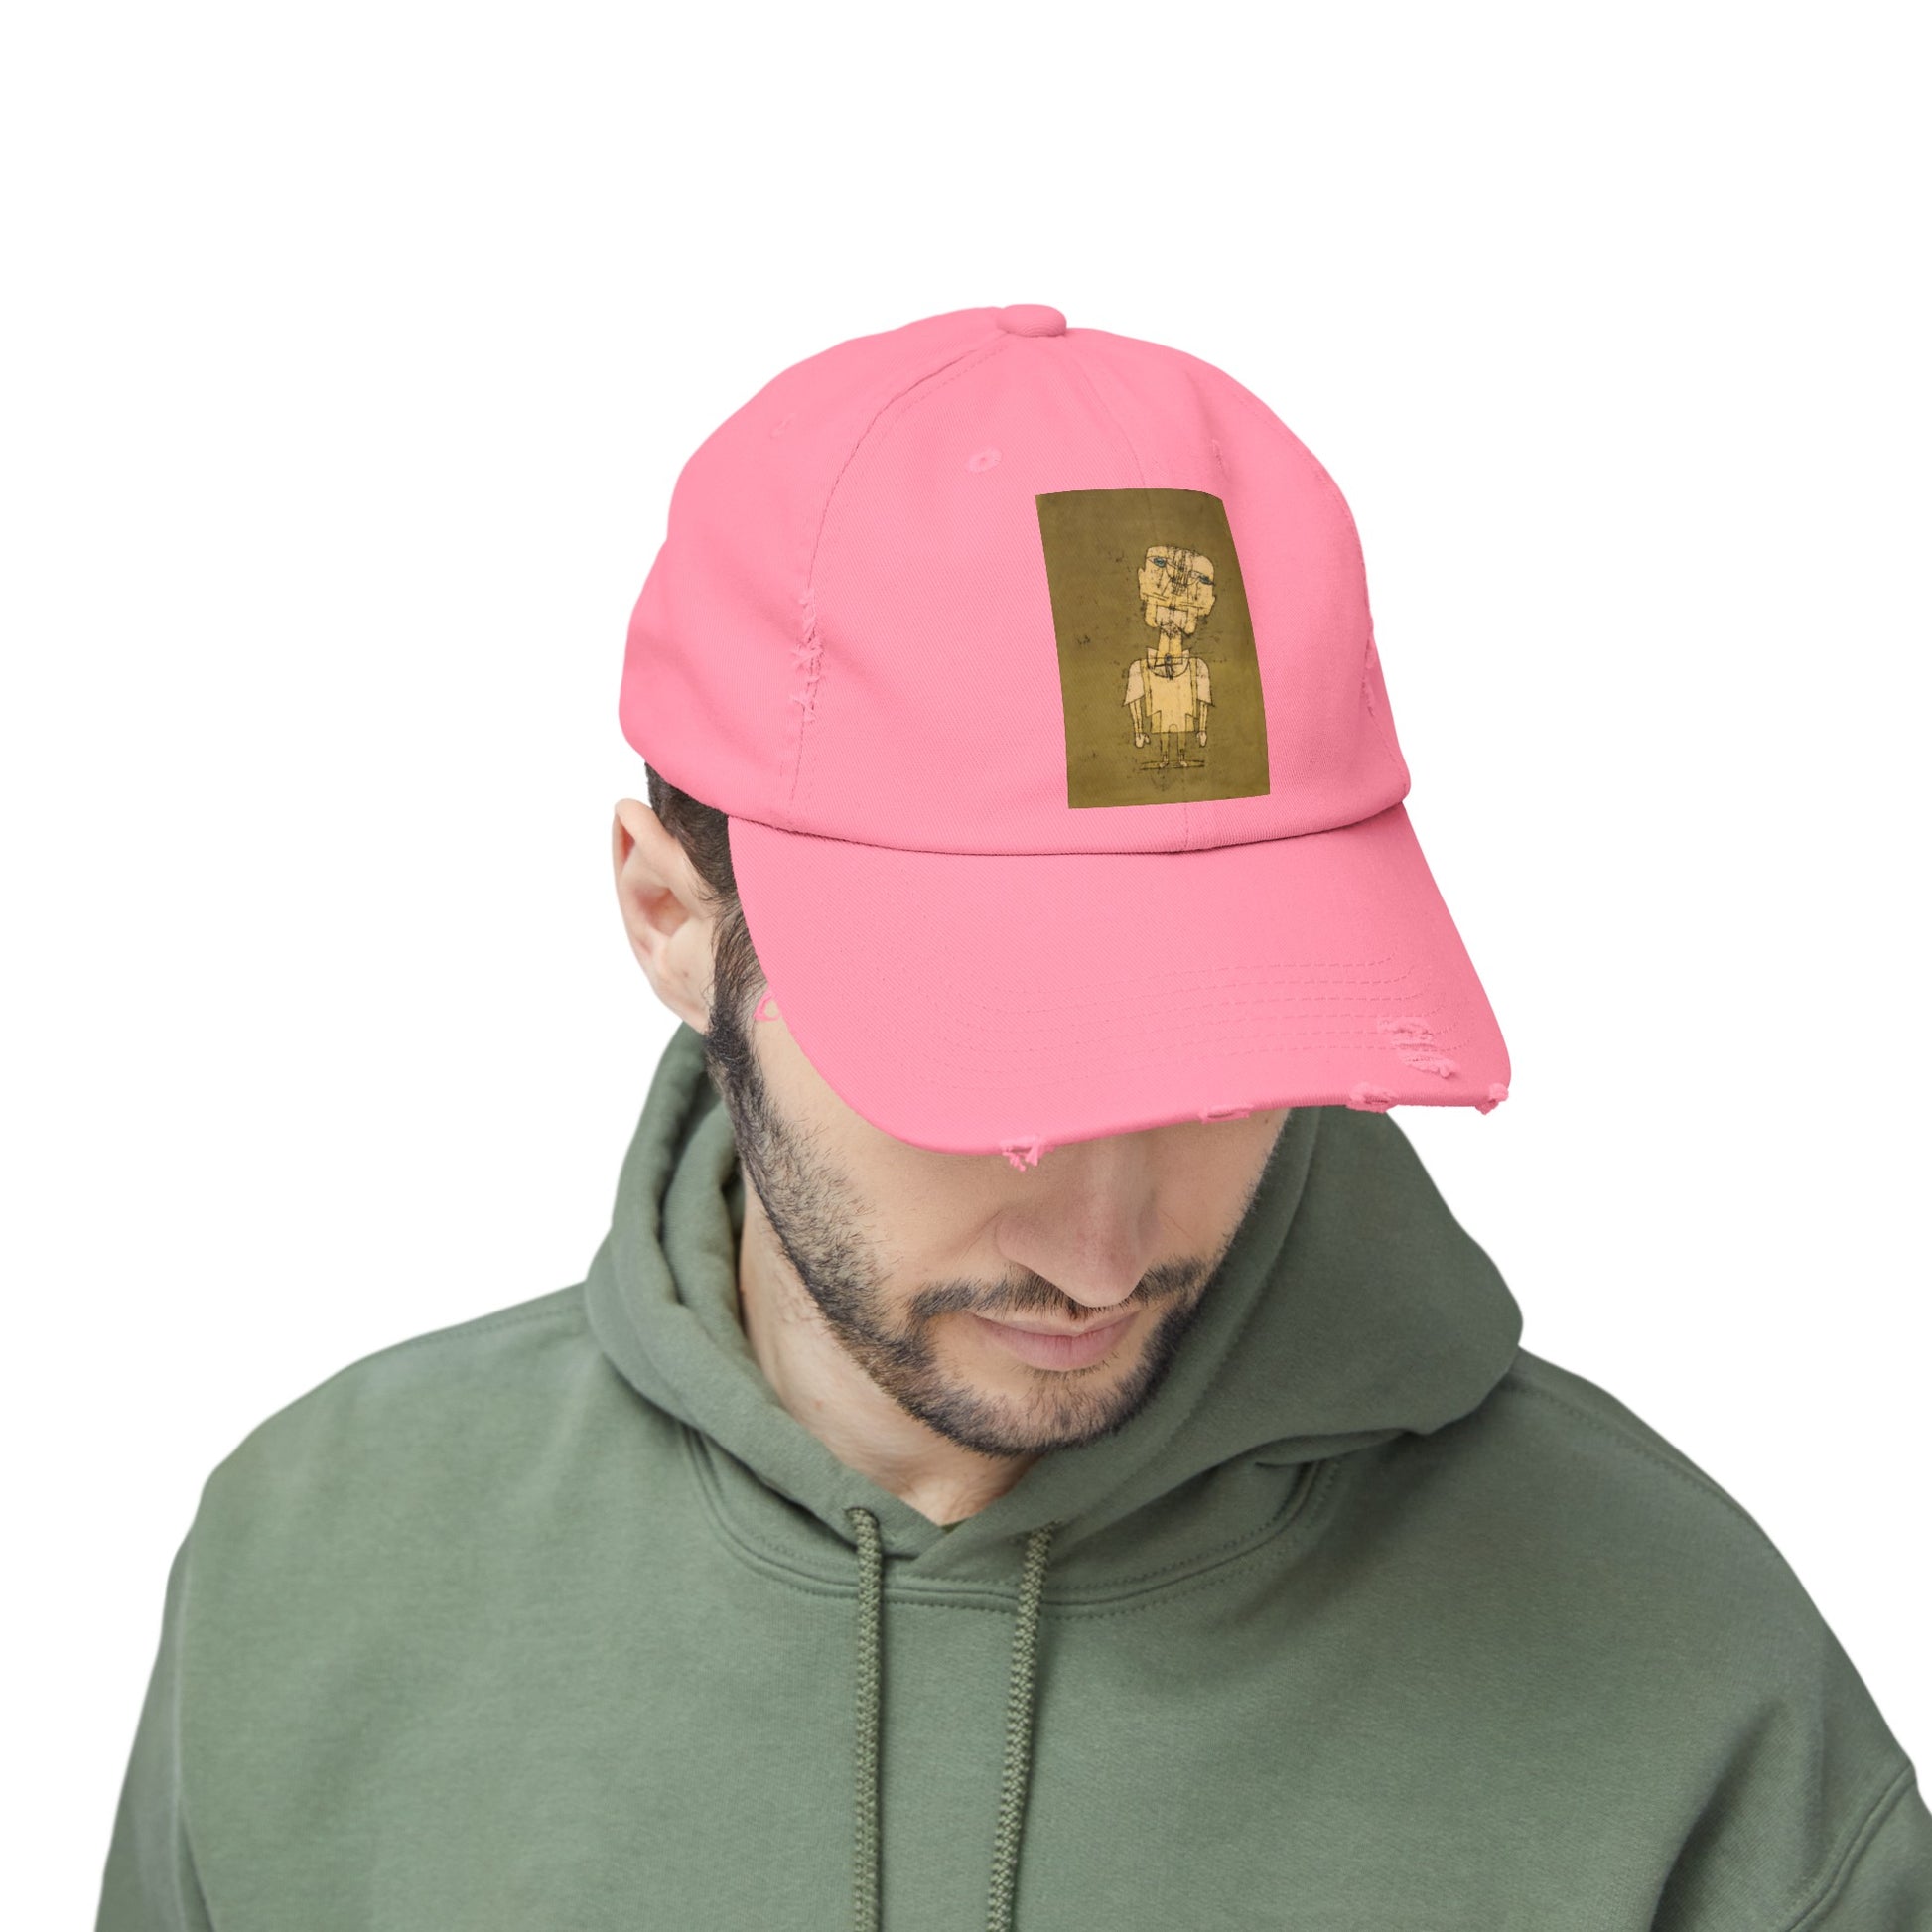 a man wearing a pink hat and a green hoodie